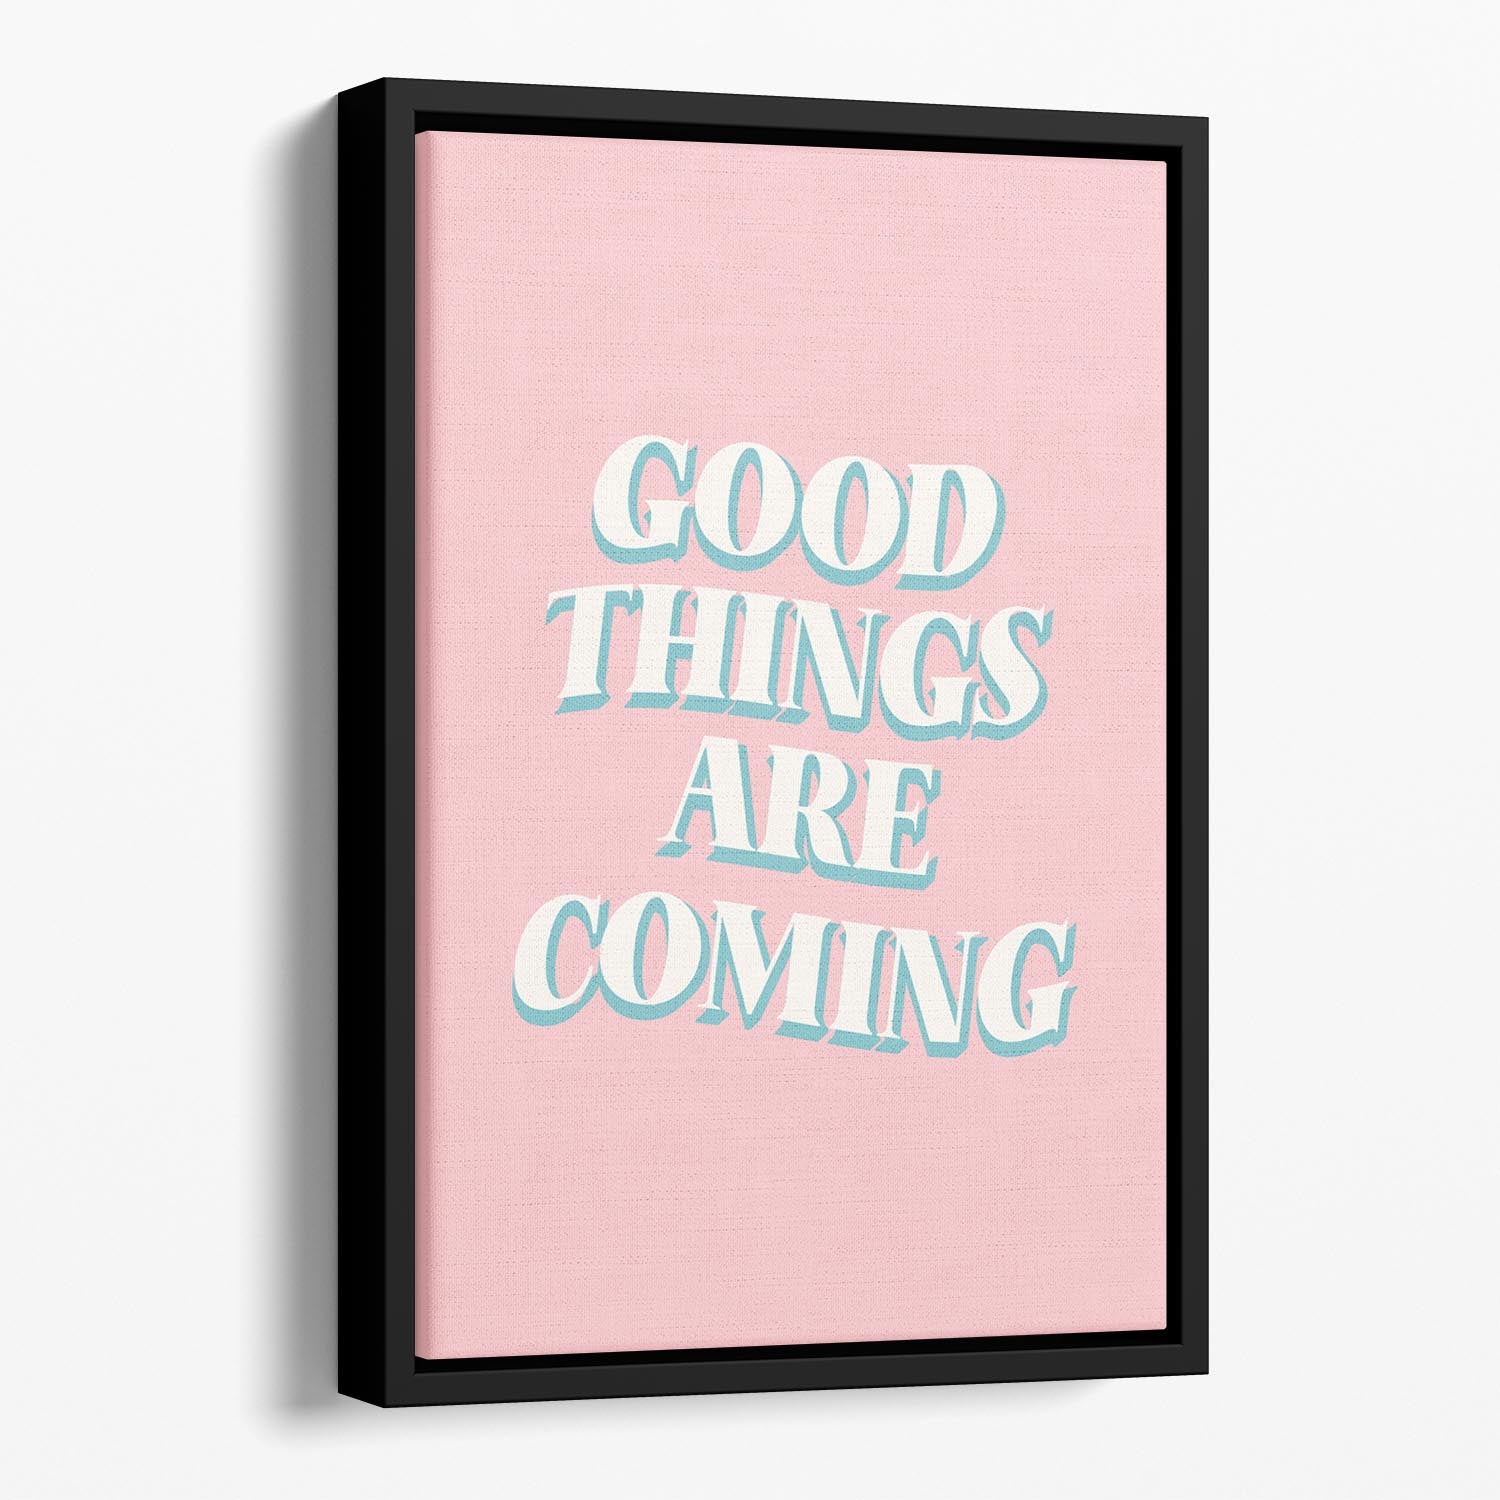 Good Things Are Coming Floating Framed Canvas - Canvas Art Rocks - 1